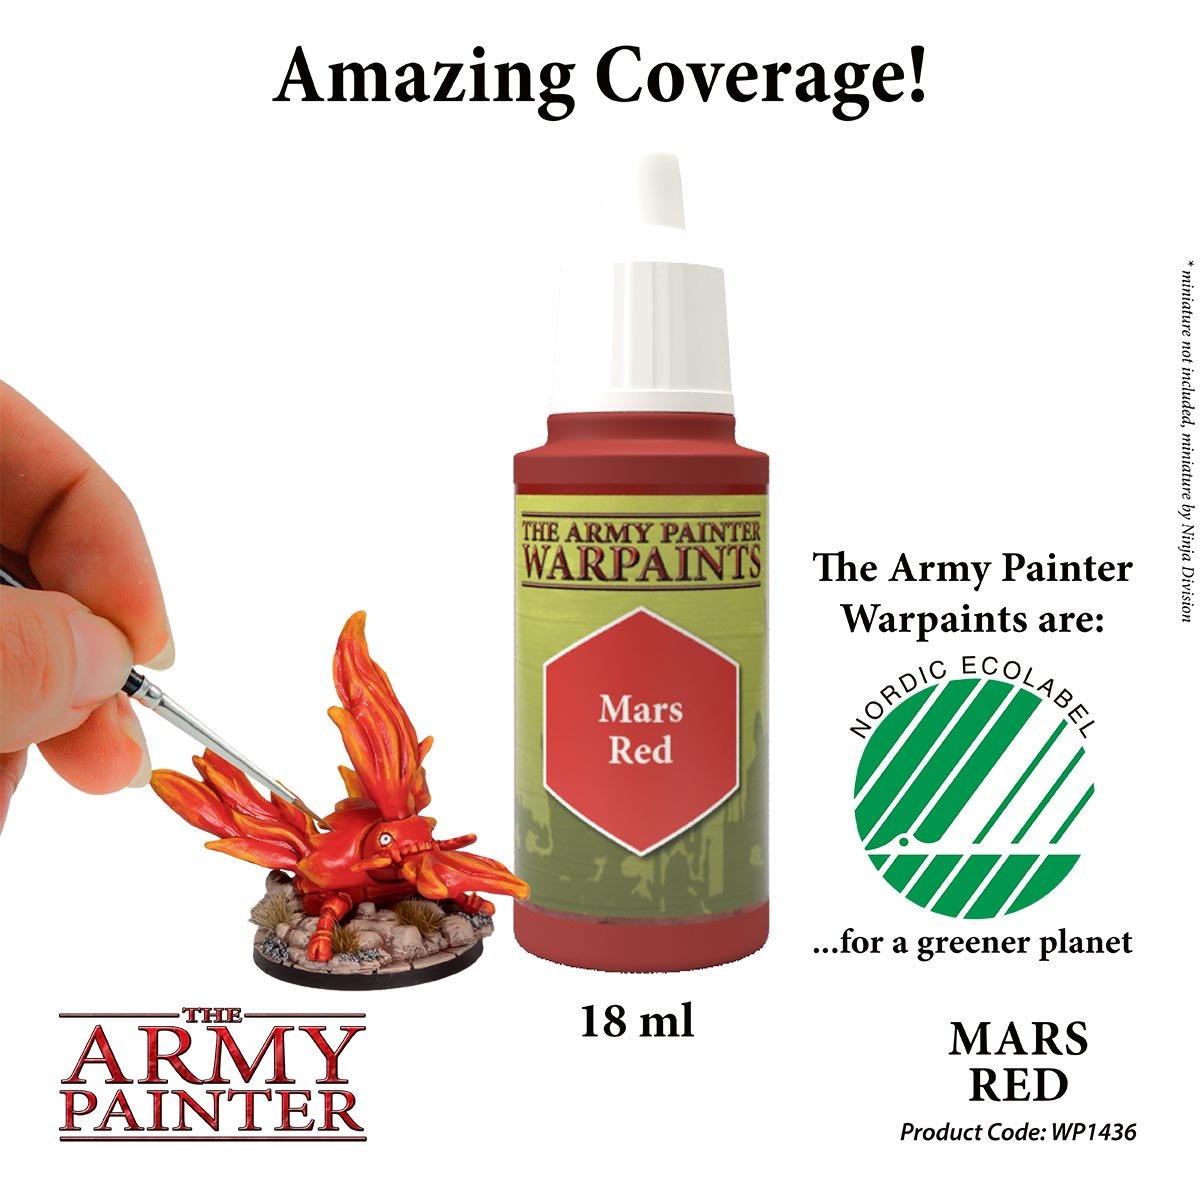 The Army Painter Warpaints WP1436 Mars Red Acrylic Paint 18ml bottle